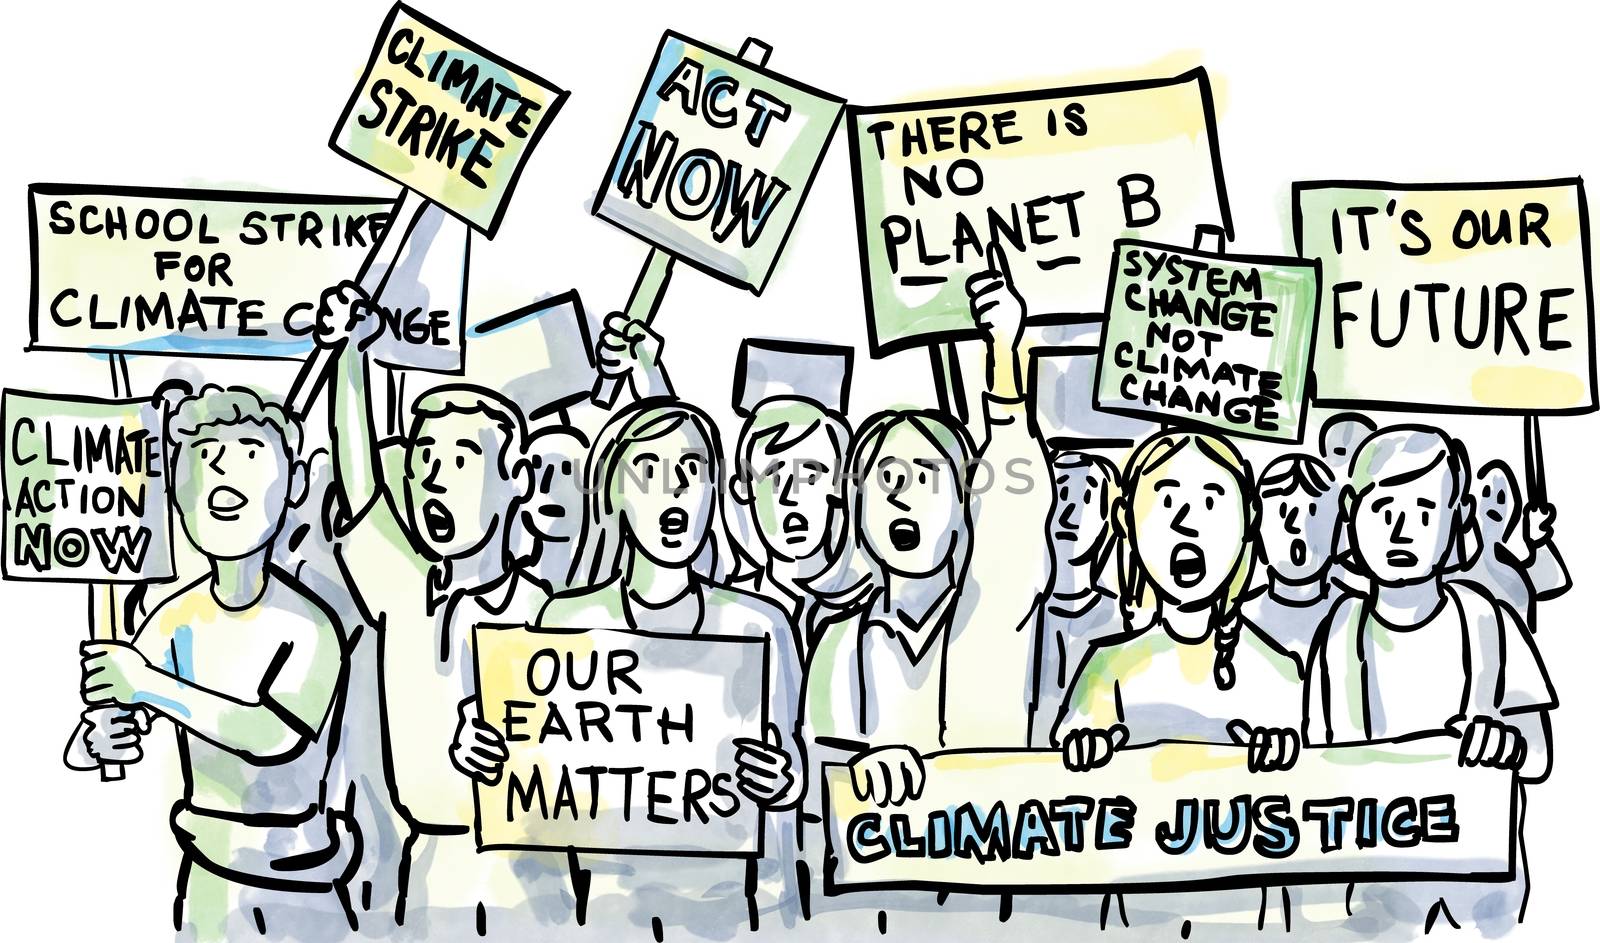 Cartoon watercolor illustration of a group of young students or kids with placards protesting on Climate Change done in full color on isolated white background.